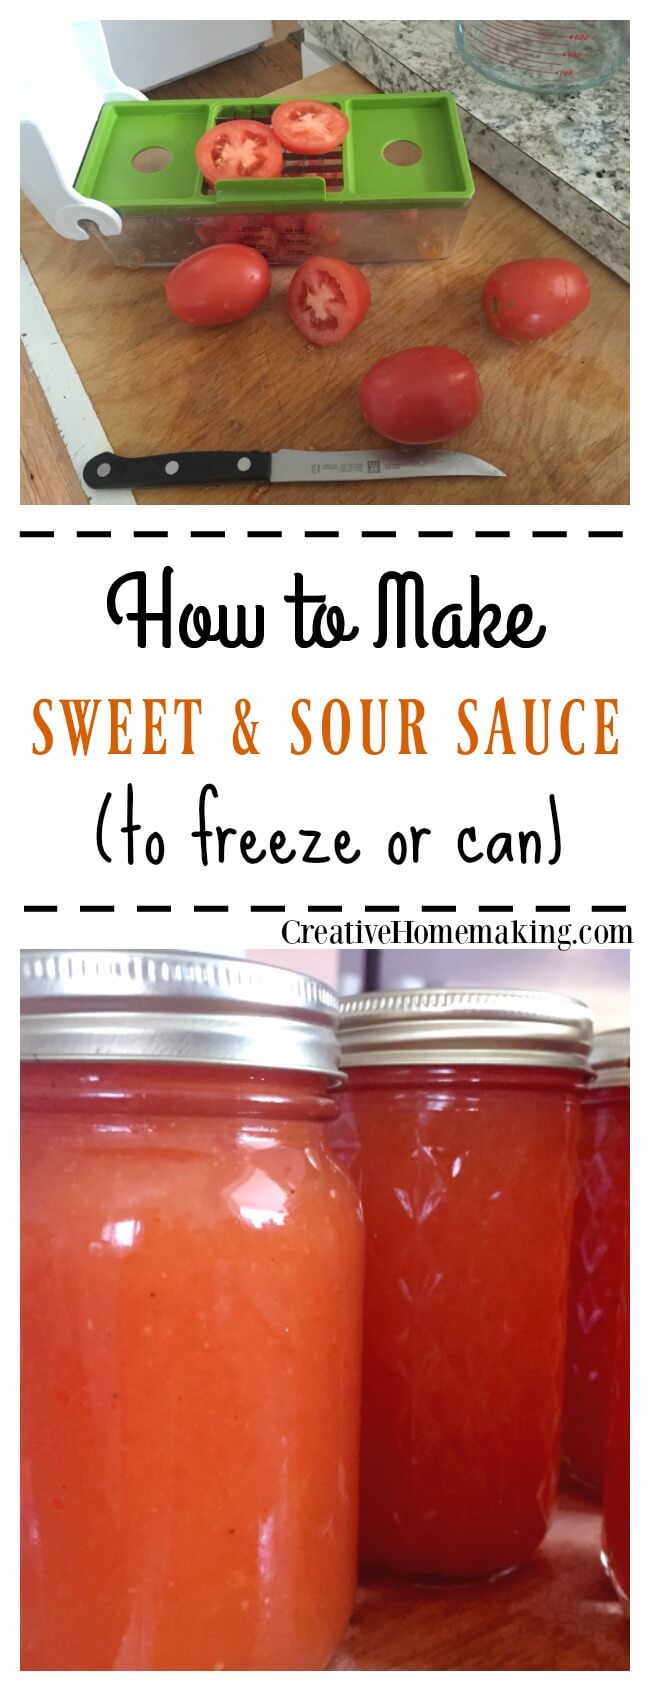 Sweet and Sour Sauce (to Freeze or Can) from Creative Homemaking